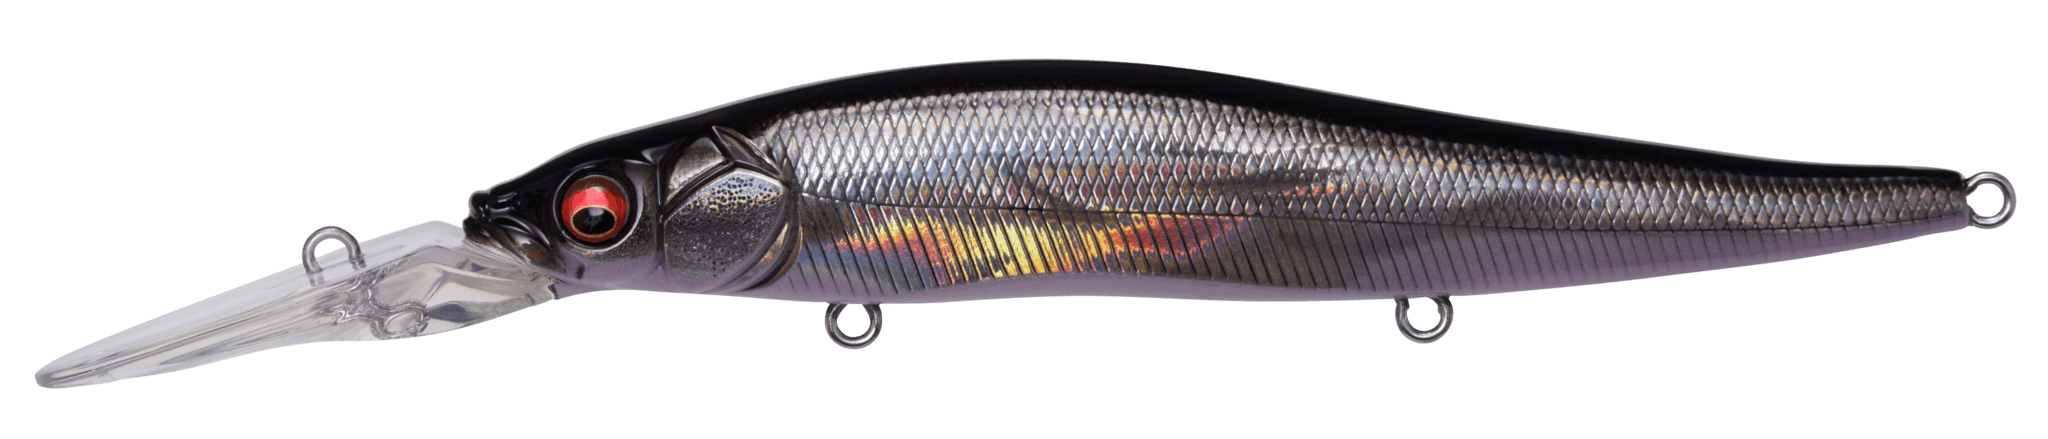 Megabass Vision 110 +2 - GG Deadly Black Shad - The Tackle Trap